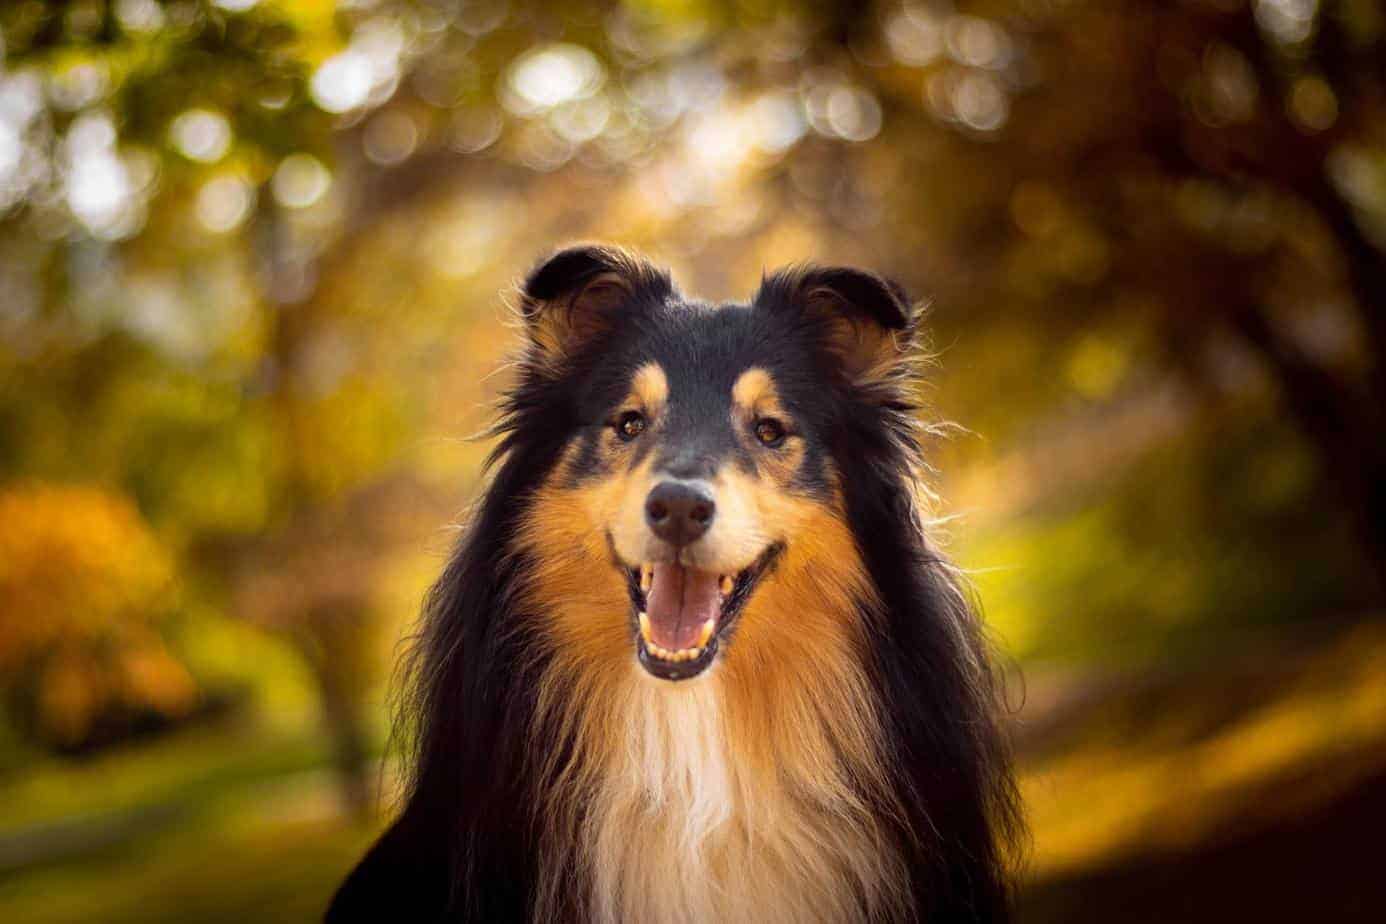 Collie: Smart, loyal, and easy-going